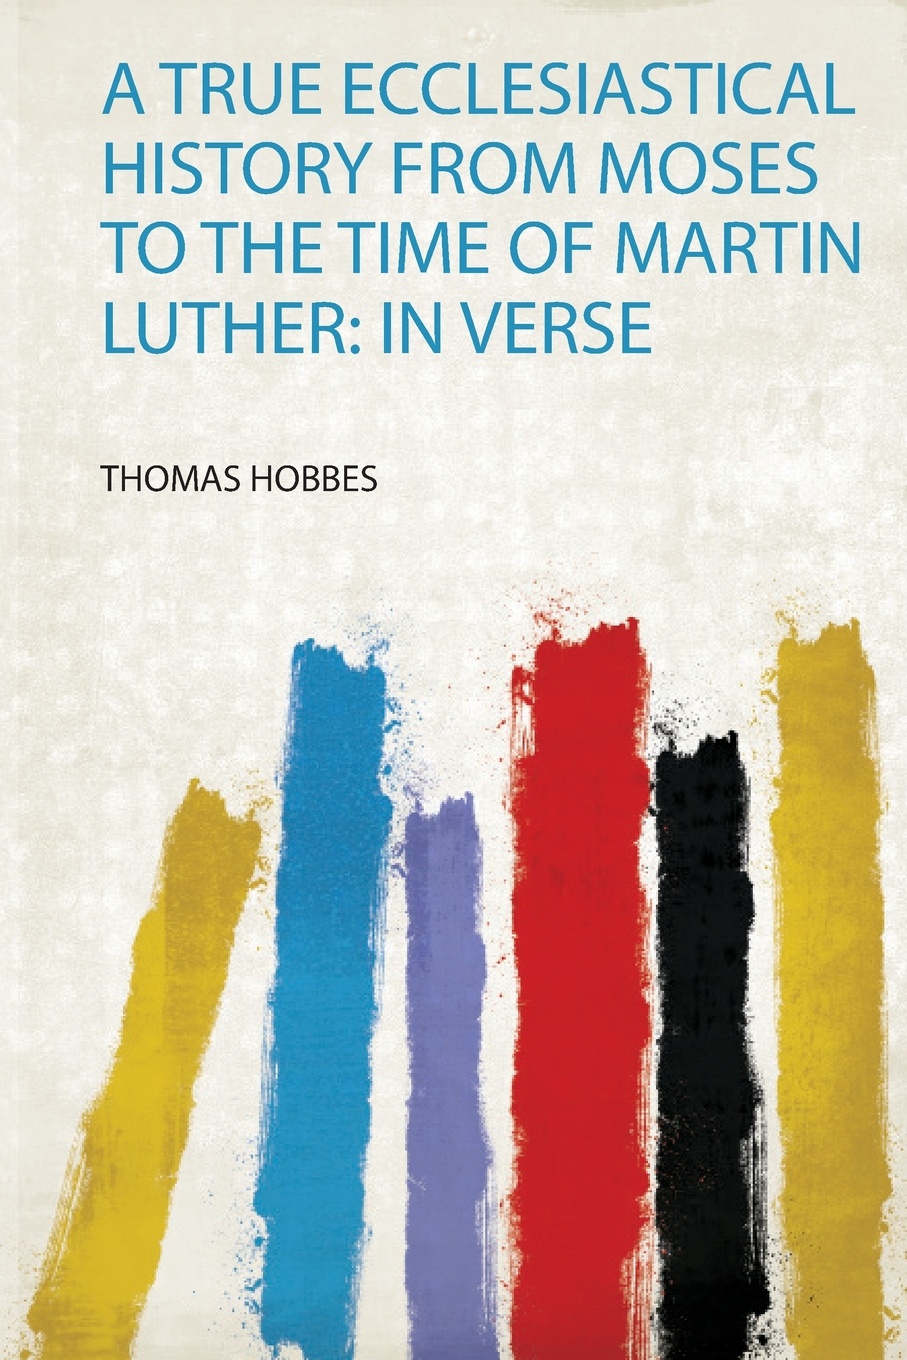 A True Ecclesiastical History from Moses to the Time of Martin Luther. in Verse